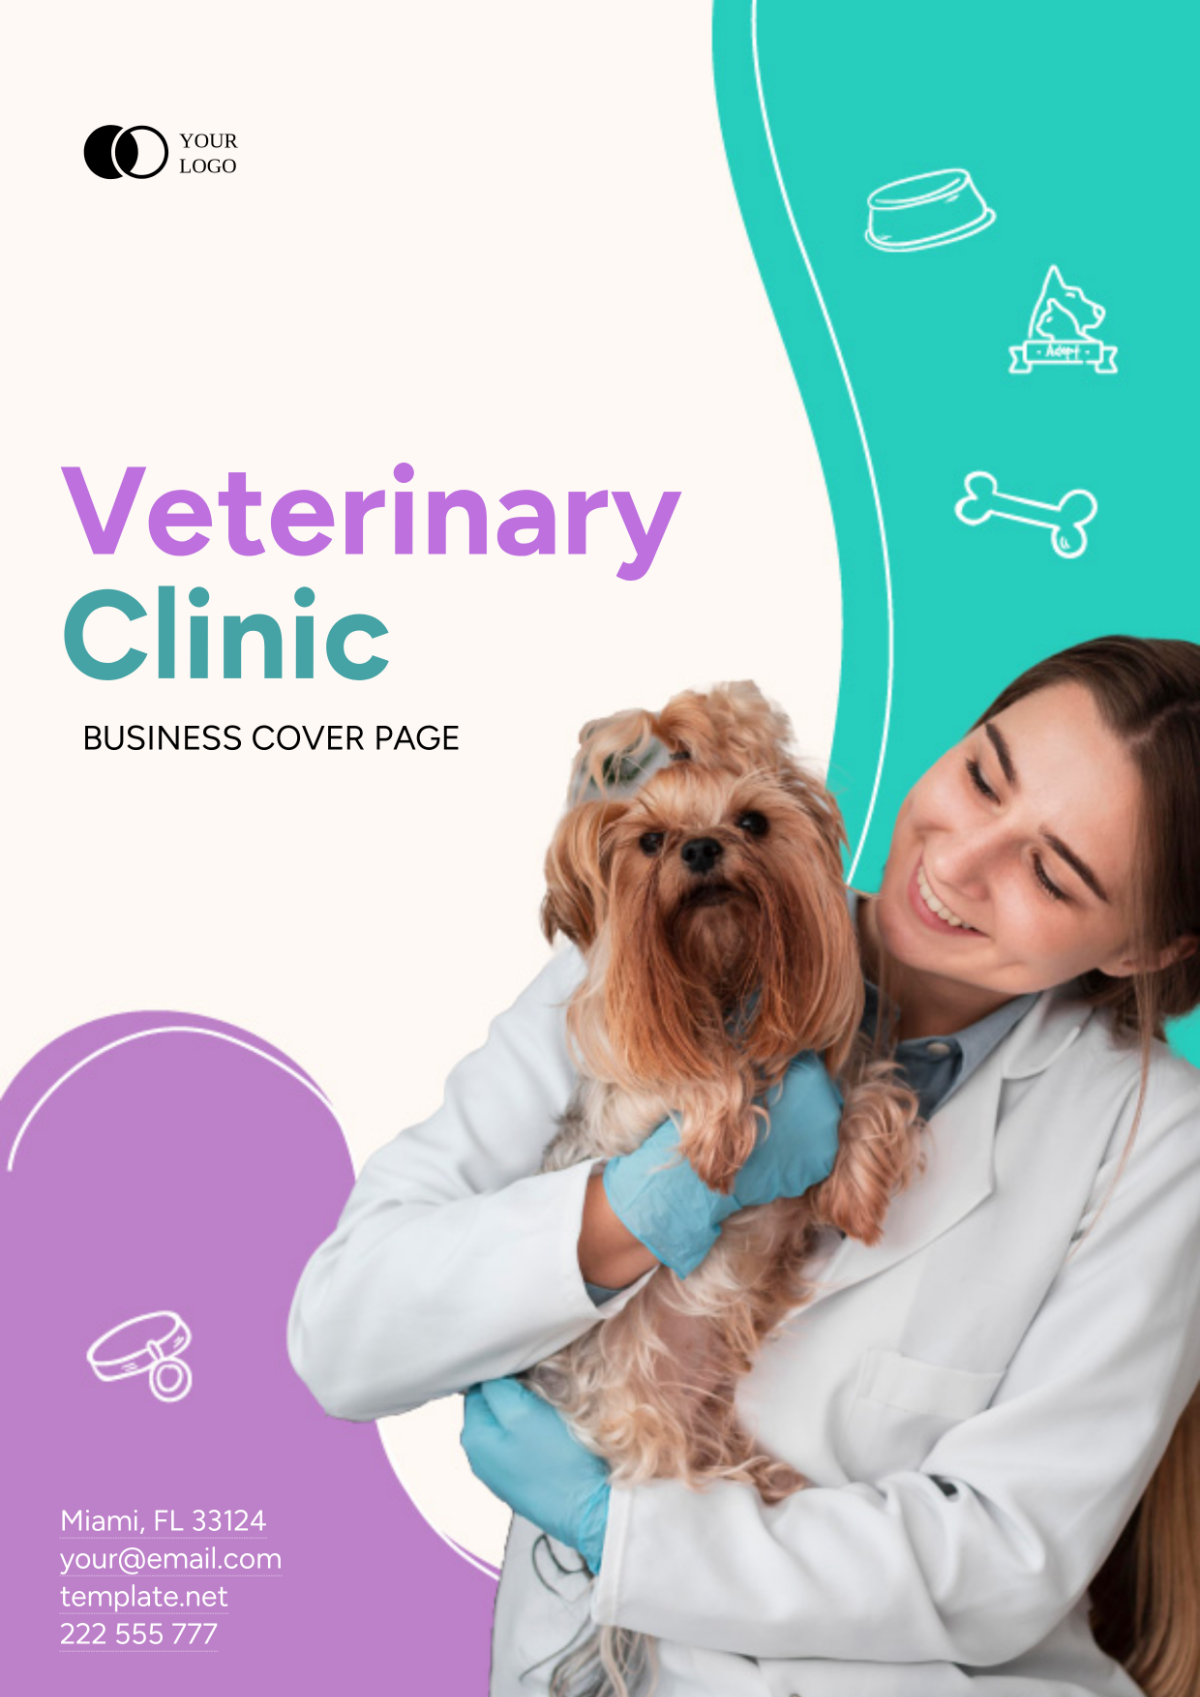 Veterinary Clinic Business Cover Page